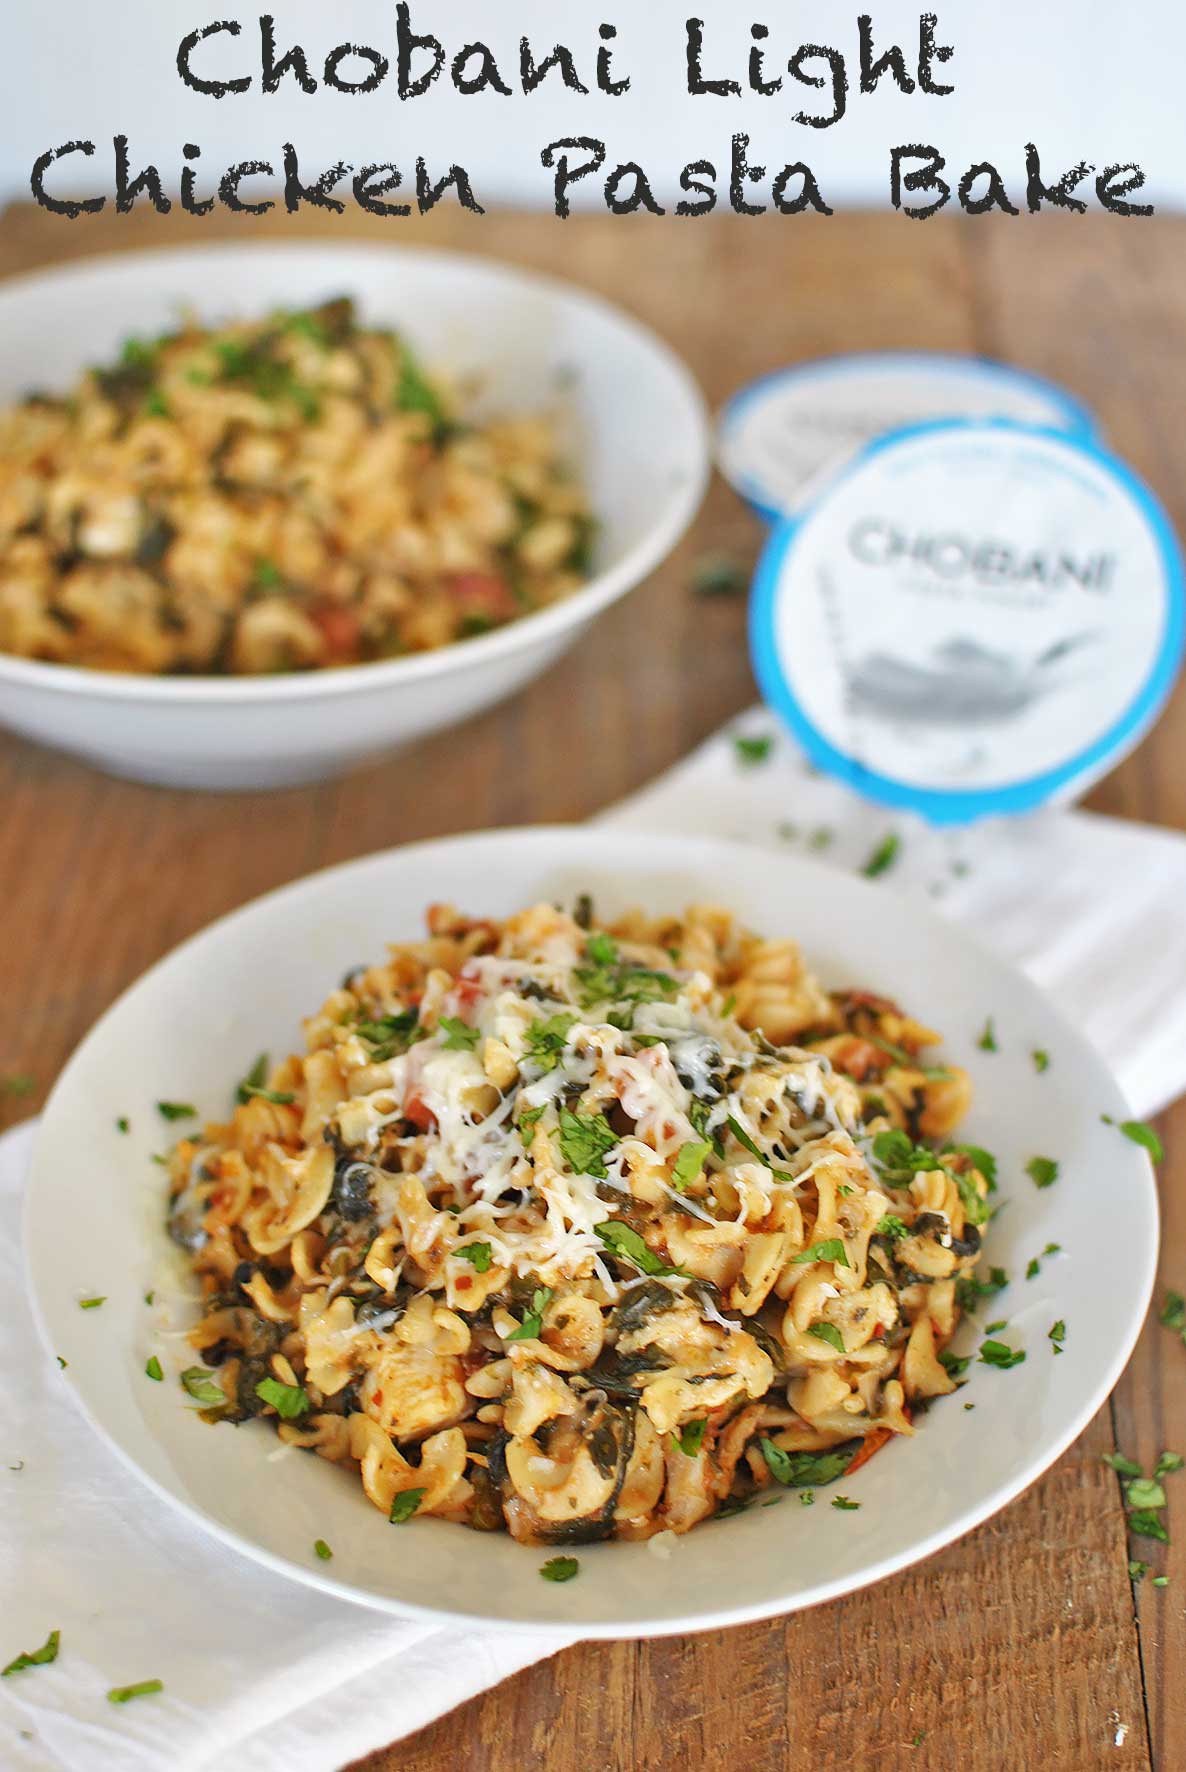 Chobani Light Chicken Pasta Bake with greek yogurt, mozzarella, spinach and tomatoes is a healthy and easy make-ahead dinner that tastes anything but light. | @beckysbestbites